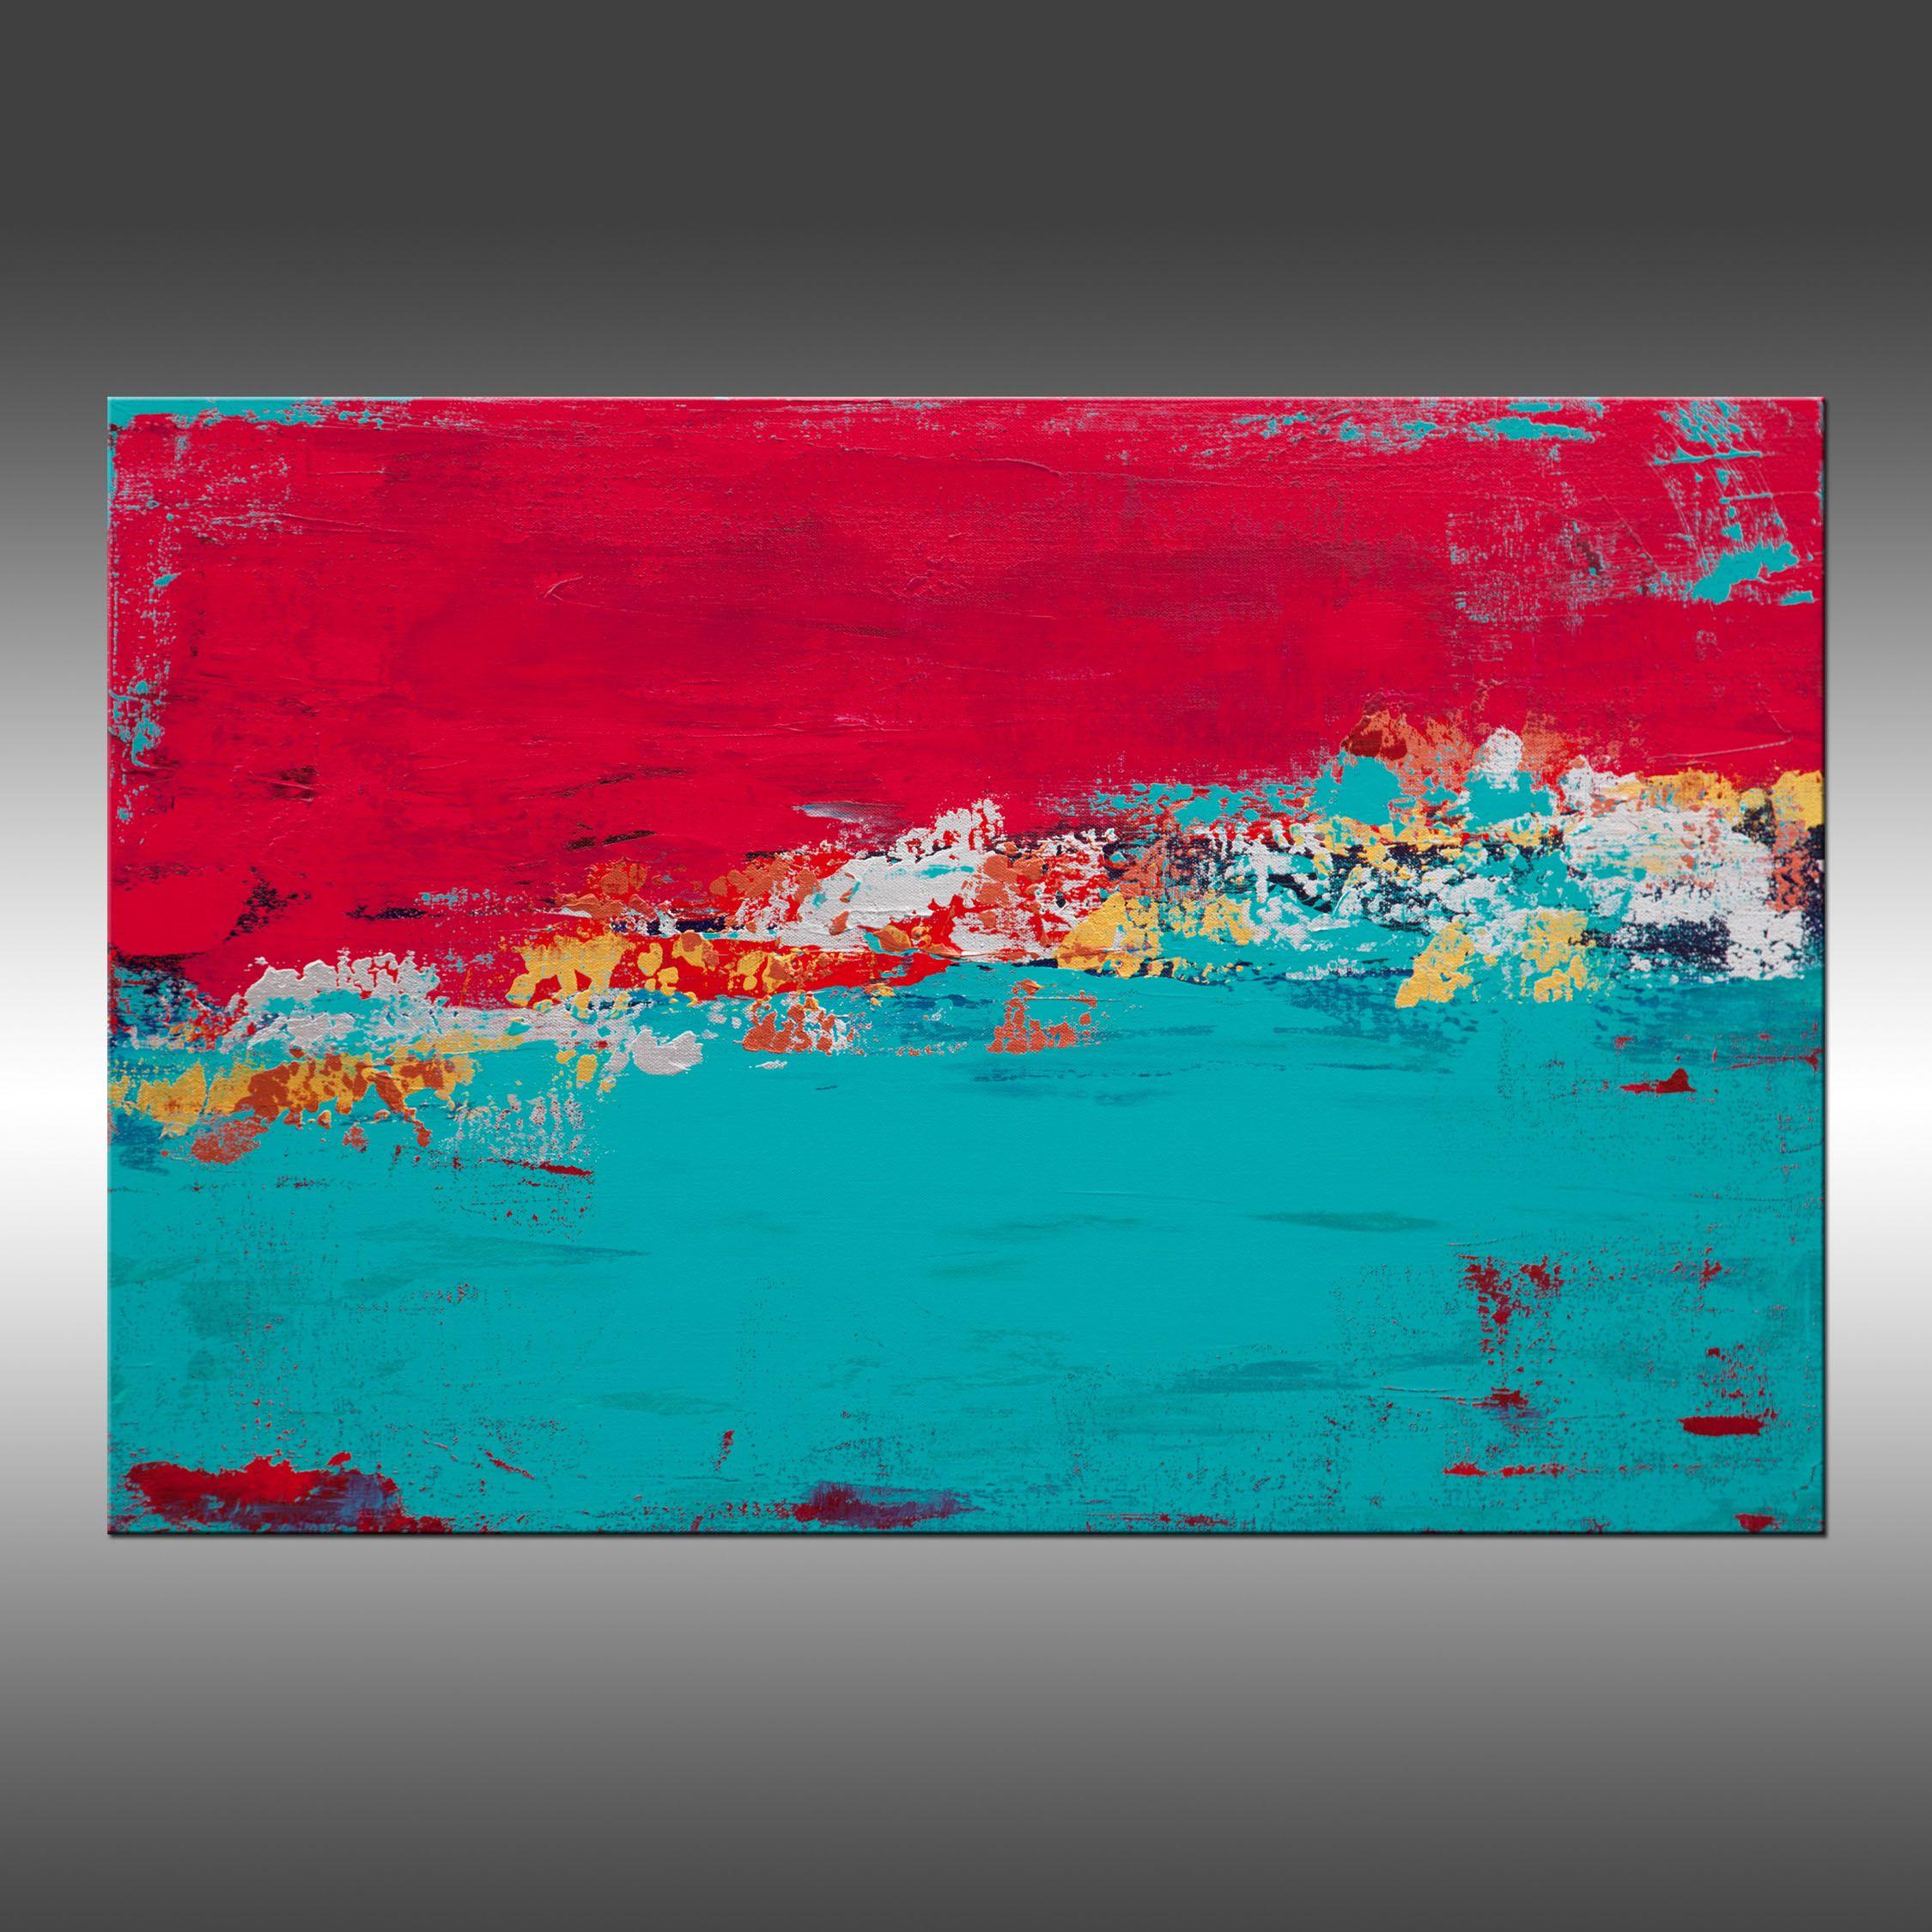 Modern Industrial 44 is an original painting, created with acrylic paint on gallery-wrapped canvas. It has a width of 30 inches and a height of 20 inches with a depth of 1.5 inches (20x30x1.5).    The colors used in the painting are red, teal, blue,